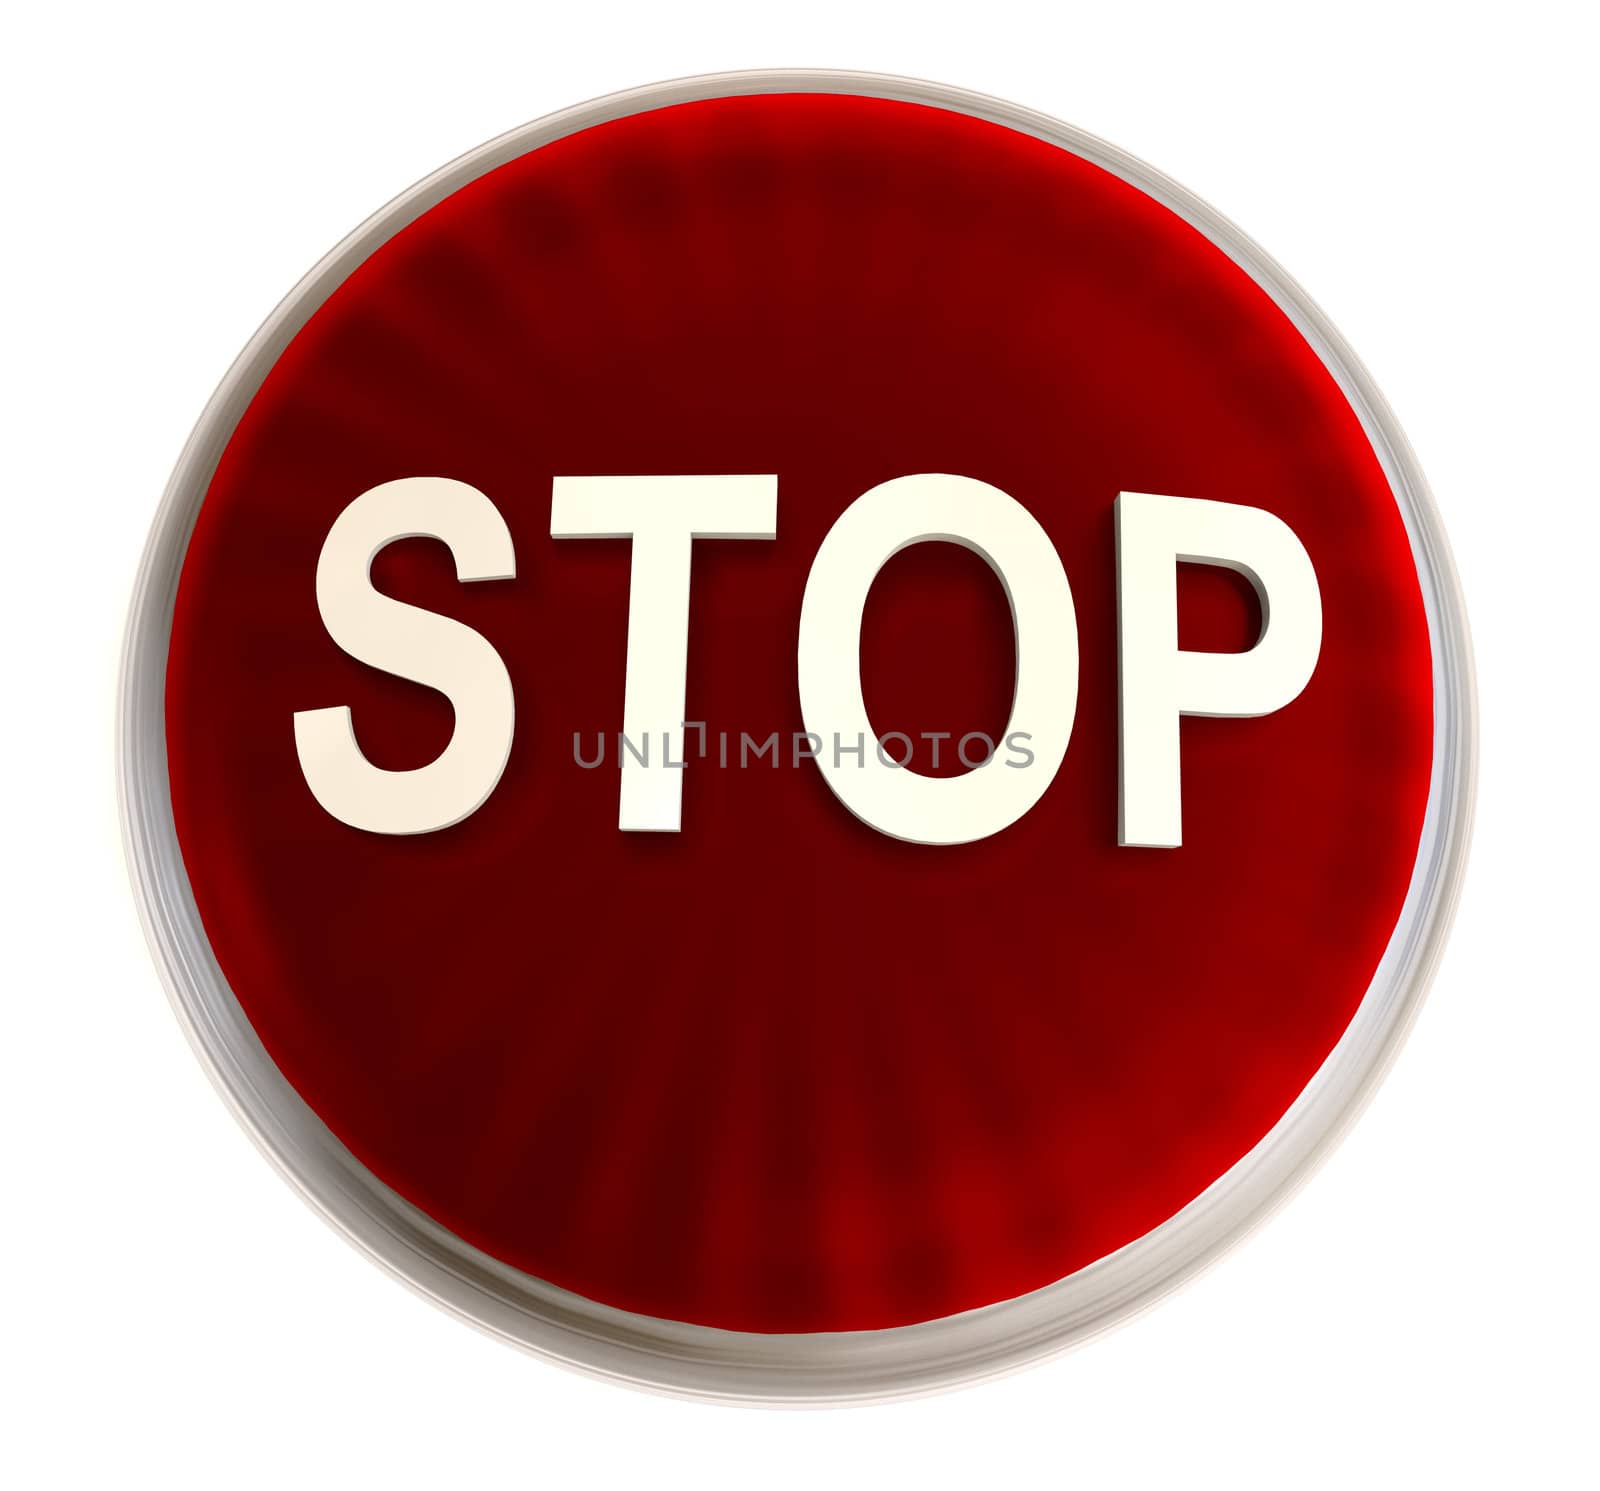 Transparent red stop button with light effect and white background